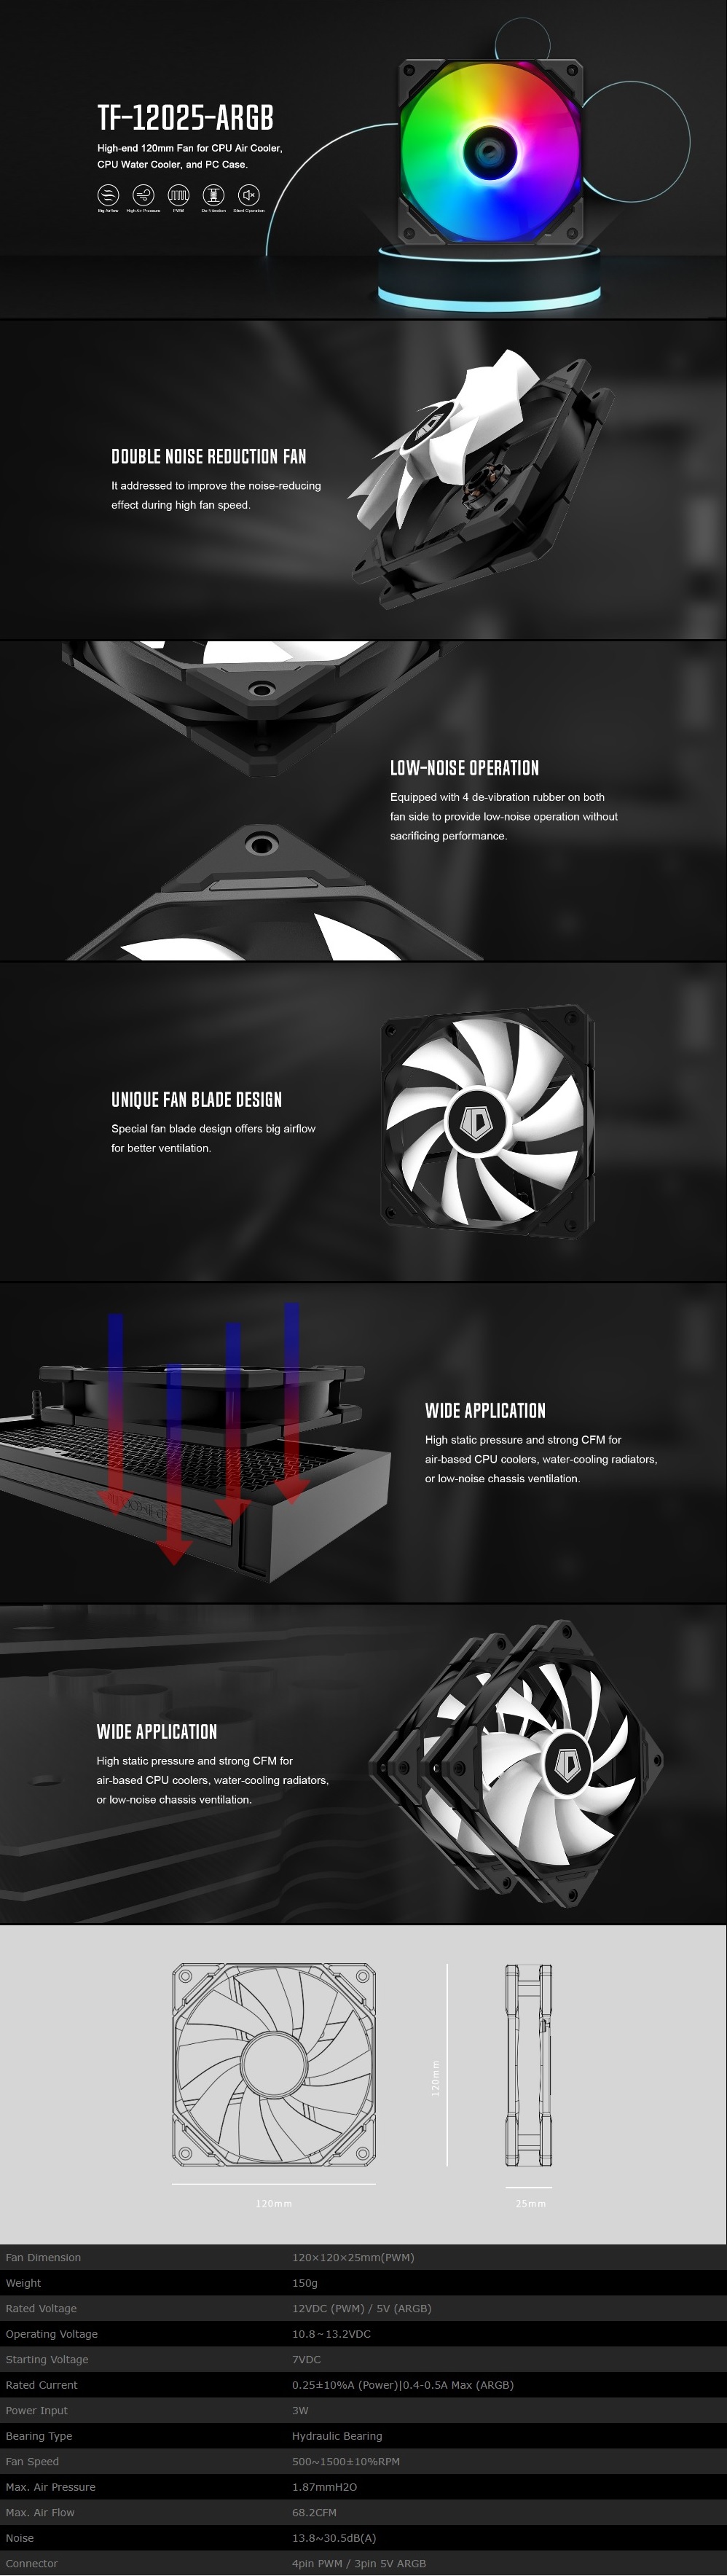 A large marketing image providing additional information about the product ID-COOLING TF Series 120mm ARGB Case Fan - Black - Additional alt info not provided